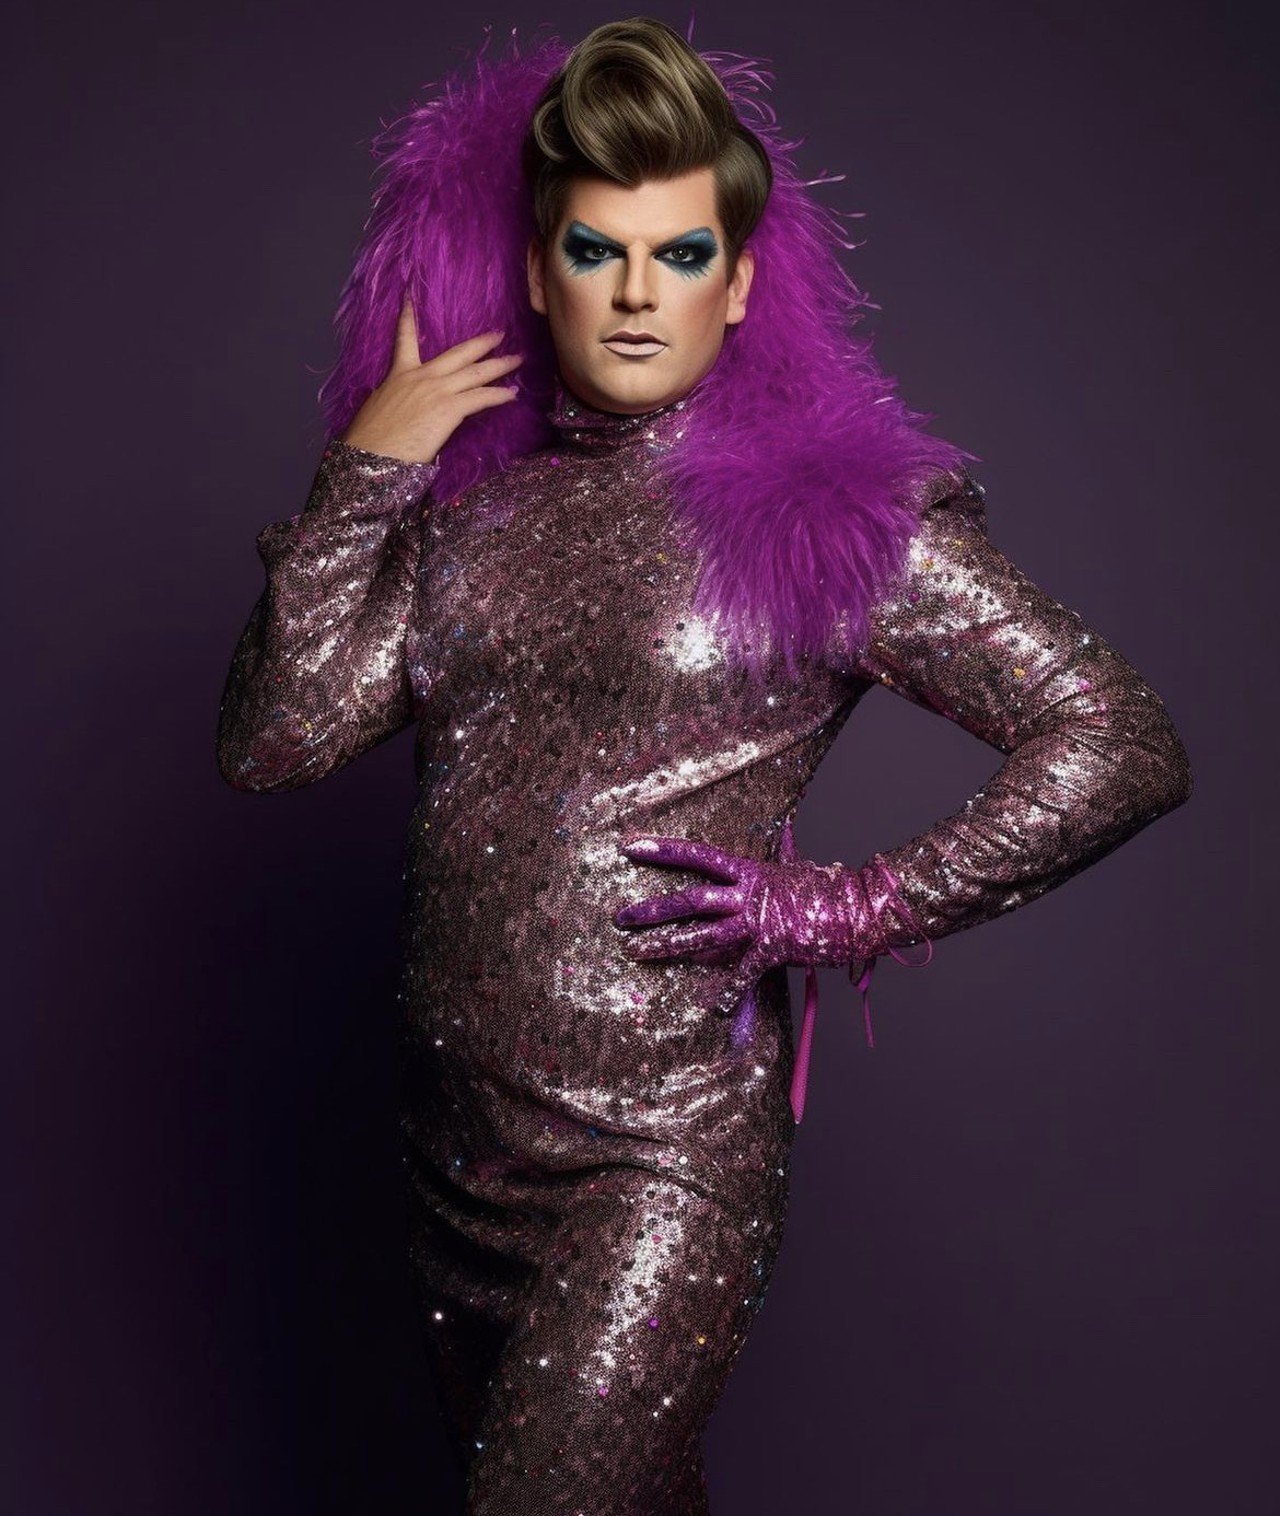  Matt Gaetz 
&#147;Ms. GoldenGaetz Showers - Sashaying her way purse-first onto military bases across America, she&#146;s protecting army brats from fun and fabulous drag queen story hour. Never mind the guns at your school, hunty. #RuPublicans #mattgaetz&#148; 